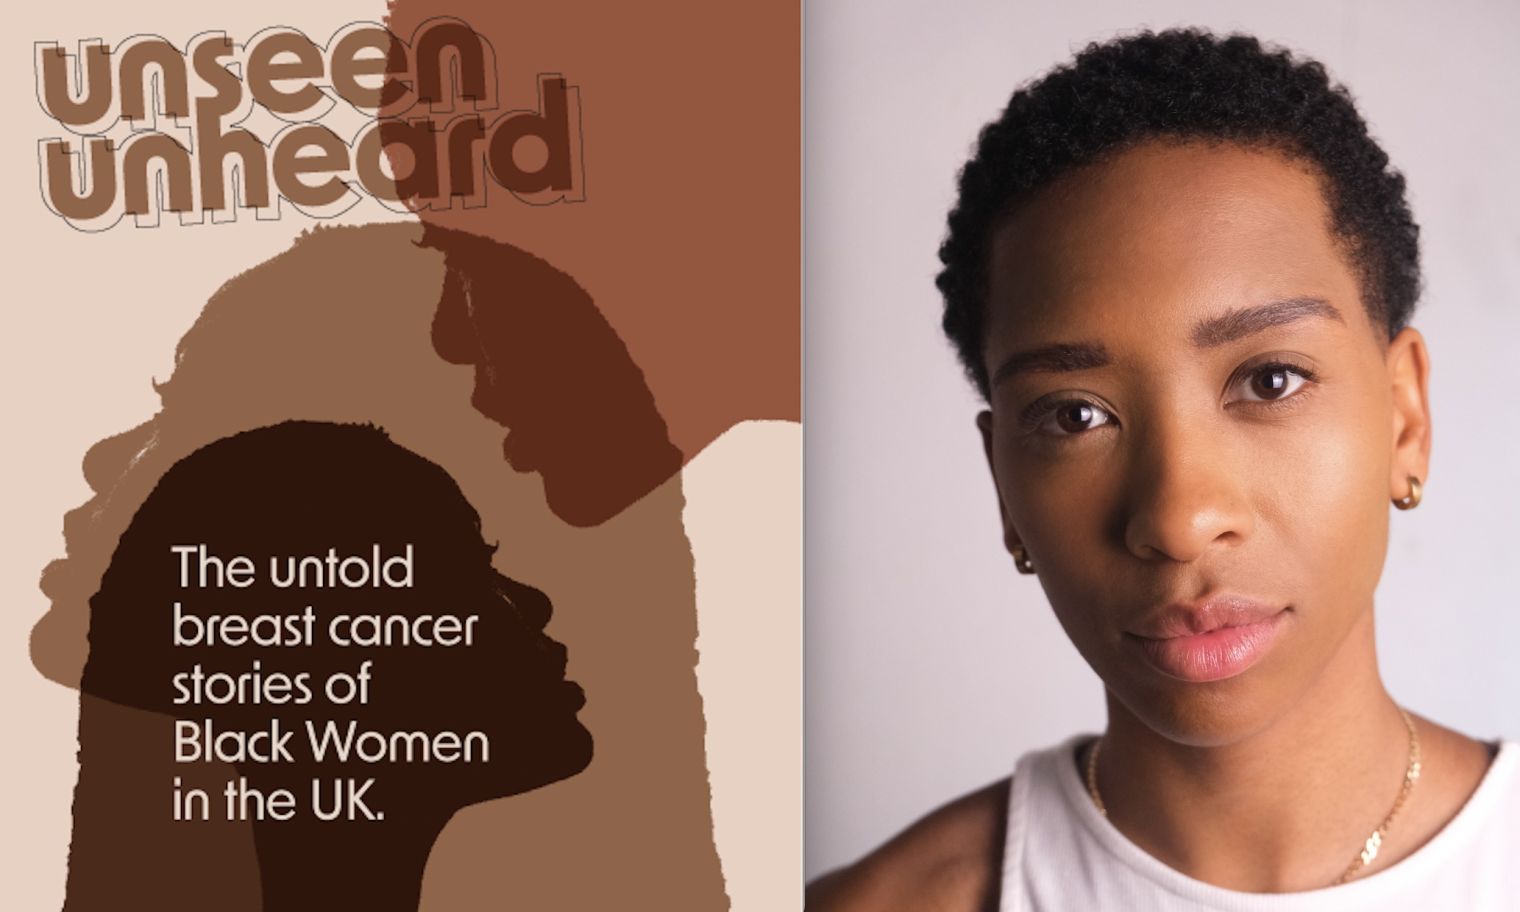 Genesis Lynea stars as Lily in ‘Unseen Unheard: The untold breast cancer stories of Black women in the UK’ at Theatre Peckham from tomorrow